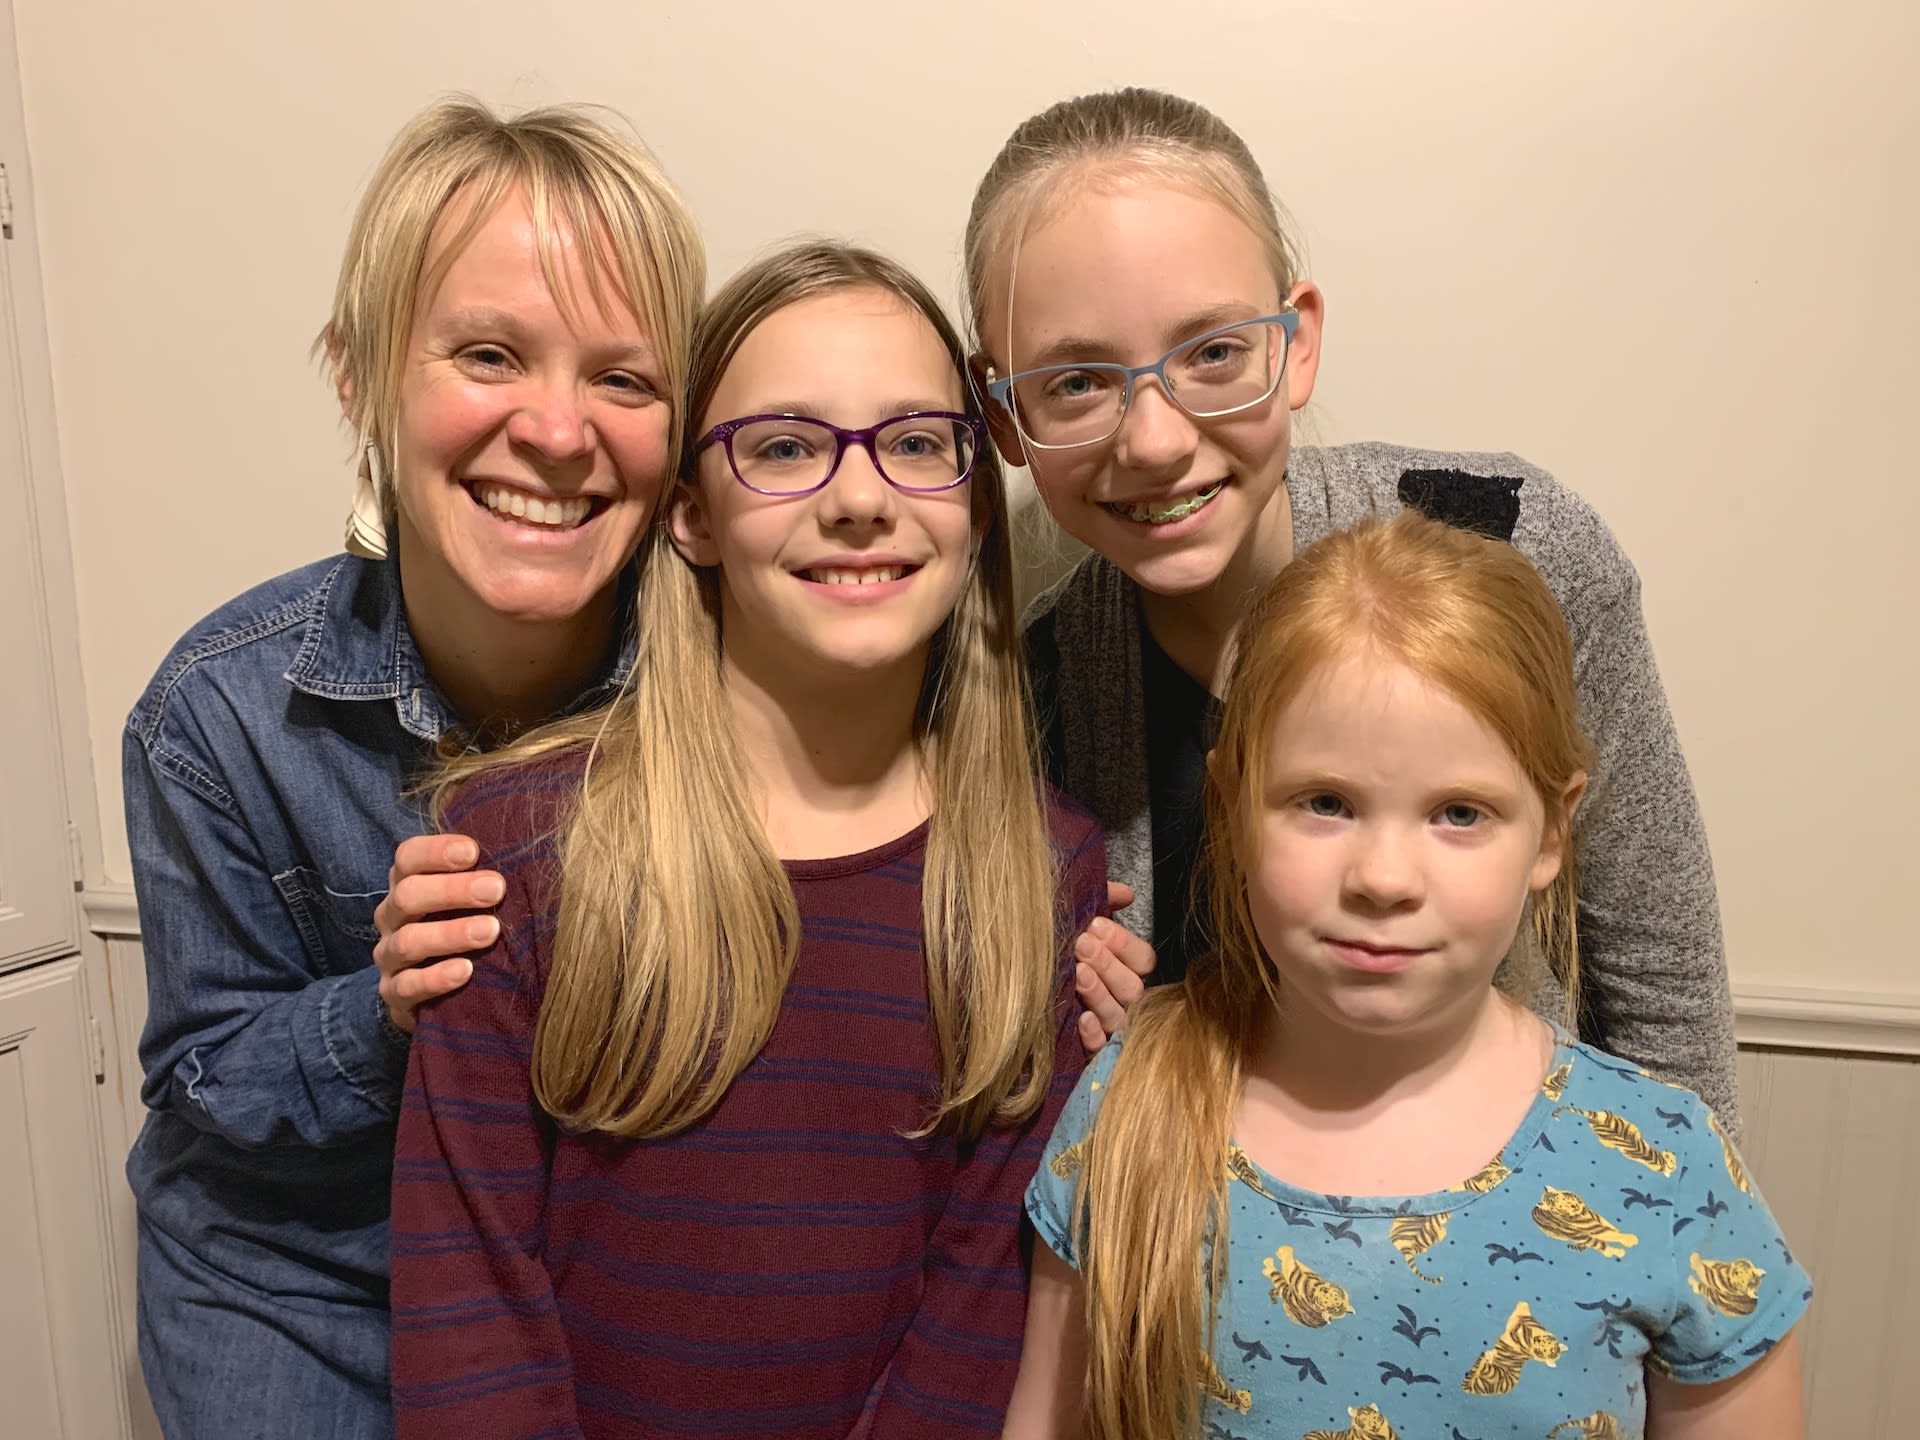 A mom and three girls smile together in their home.